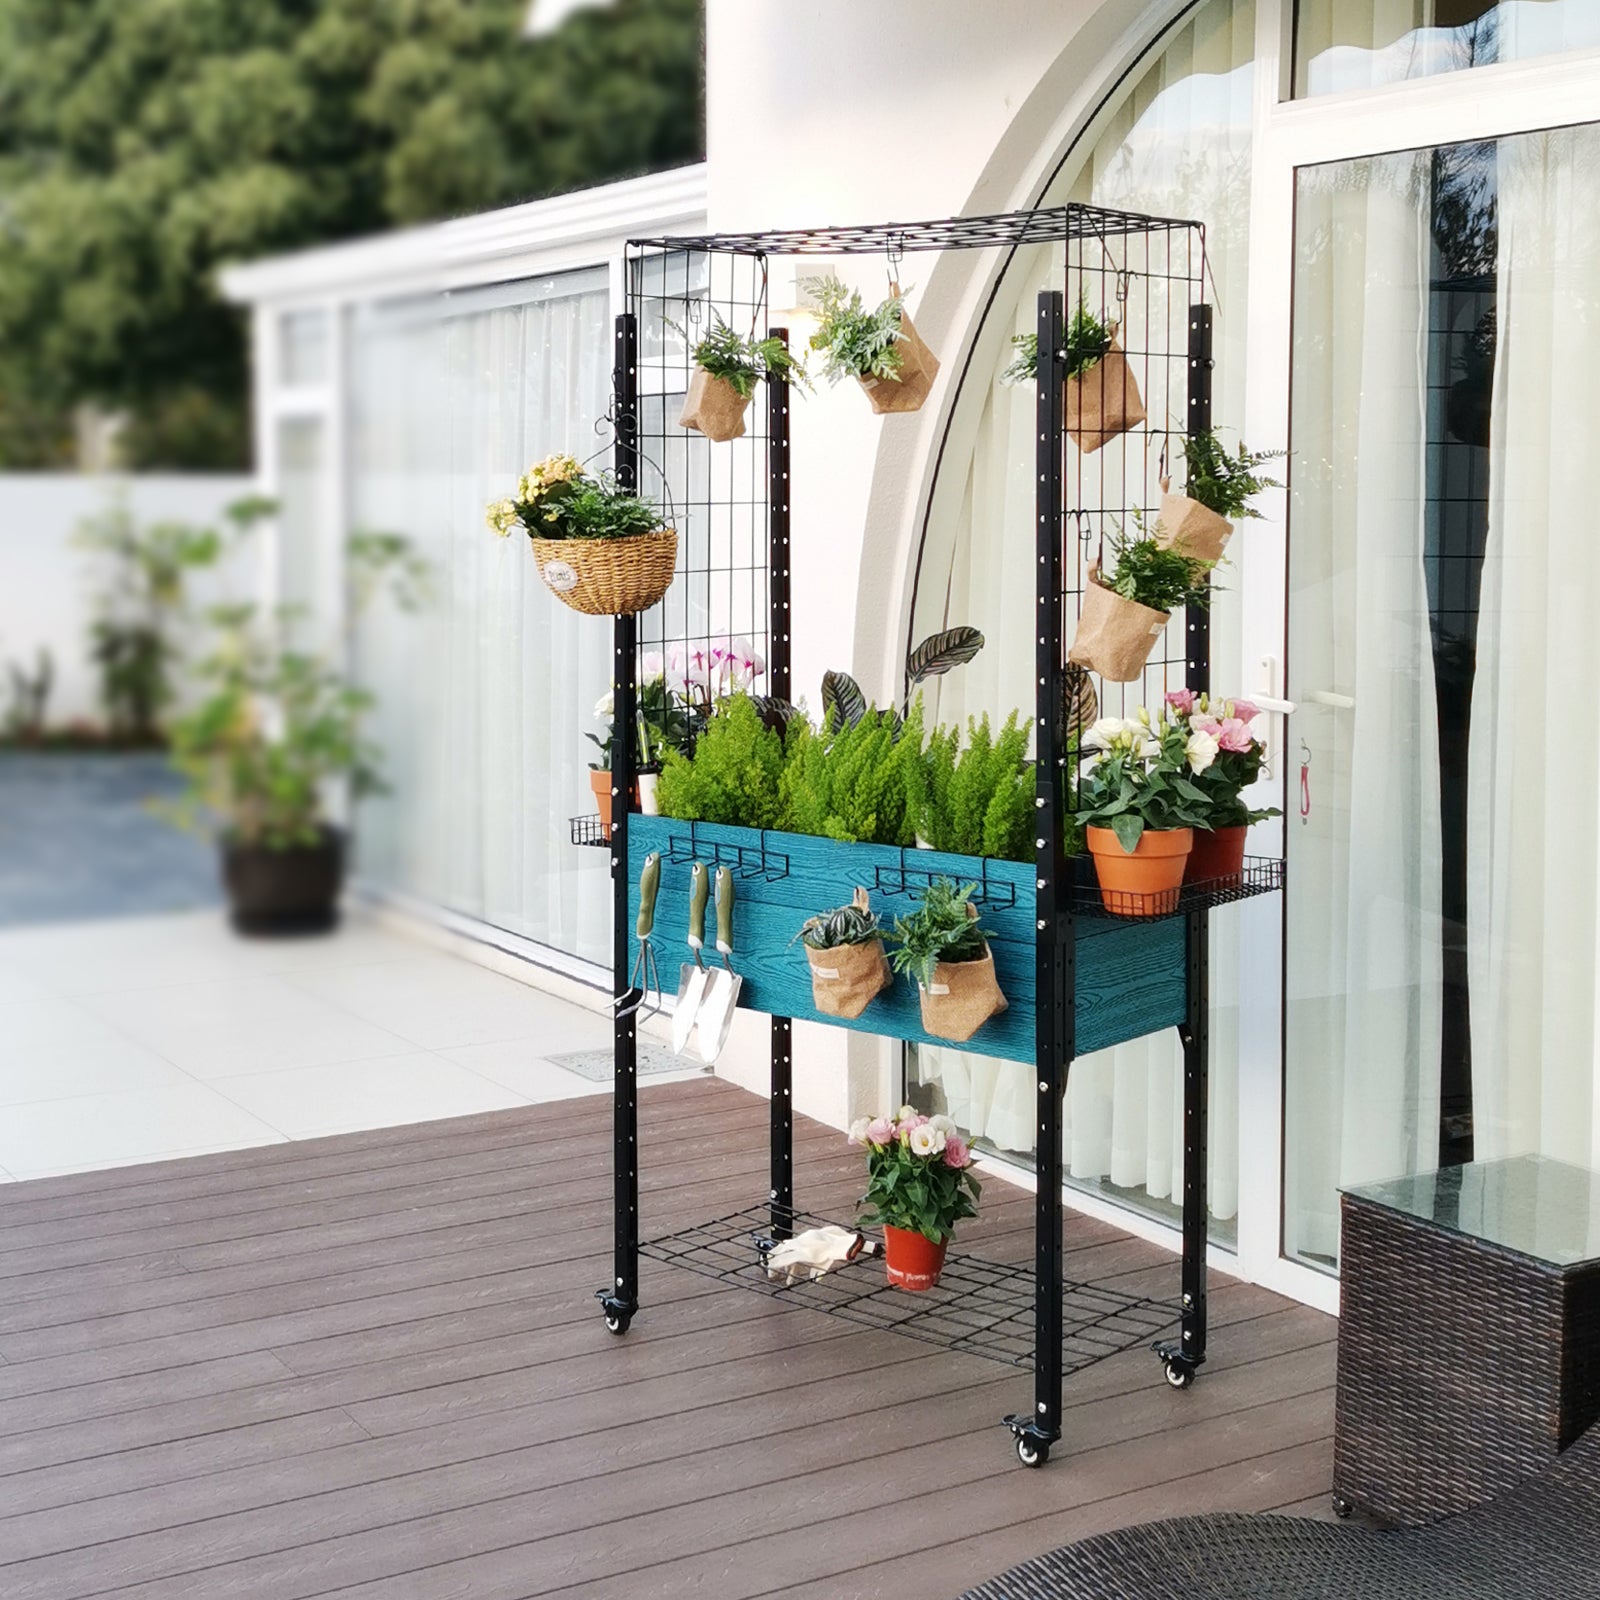 K2304 Self-watering Mobile Elevated Planter in Blue with Arch Trellis and UnderShelf and Basket & Hook Set